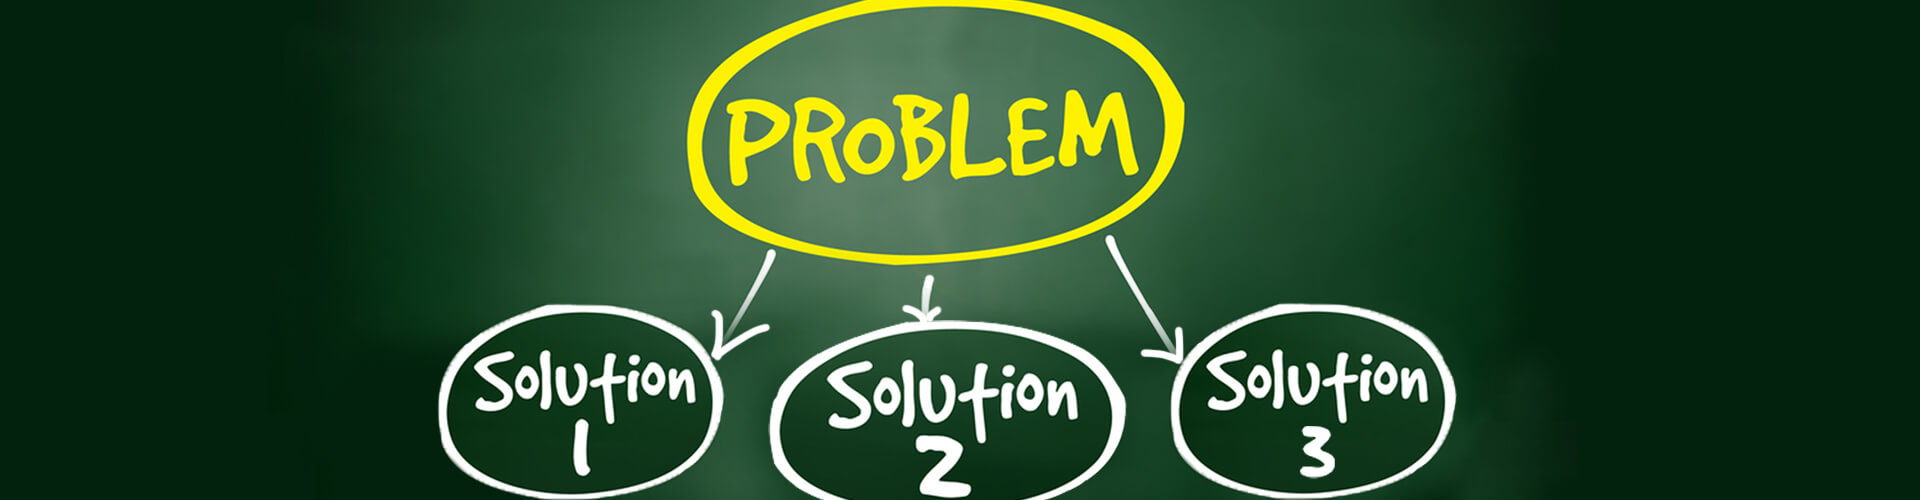 how many steps are there in problem solving